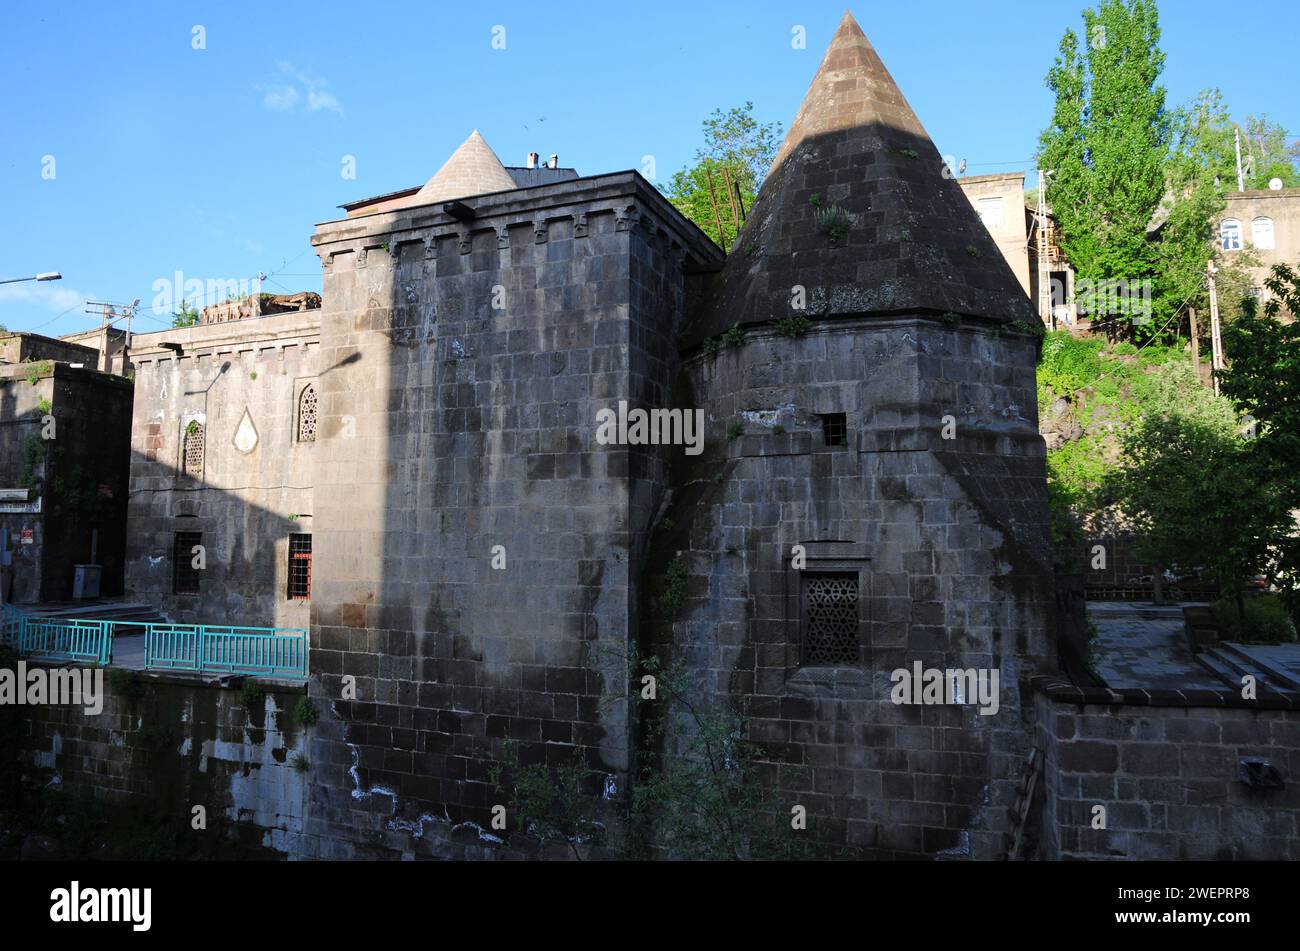 Serefiye Mosque, located in Bitlis, Turkey, was built in 1529. Stock Photo